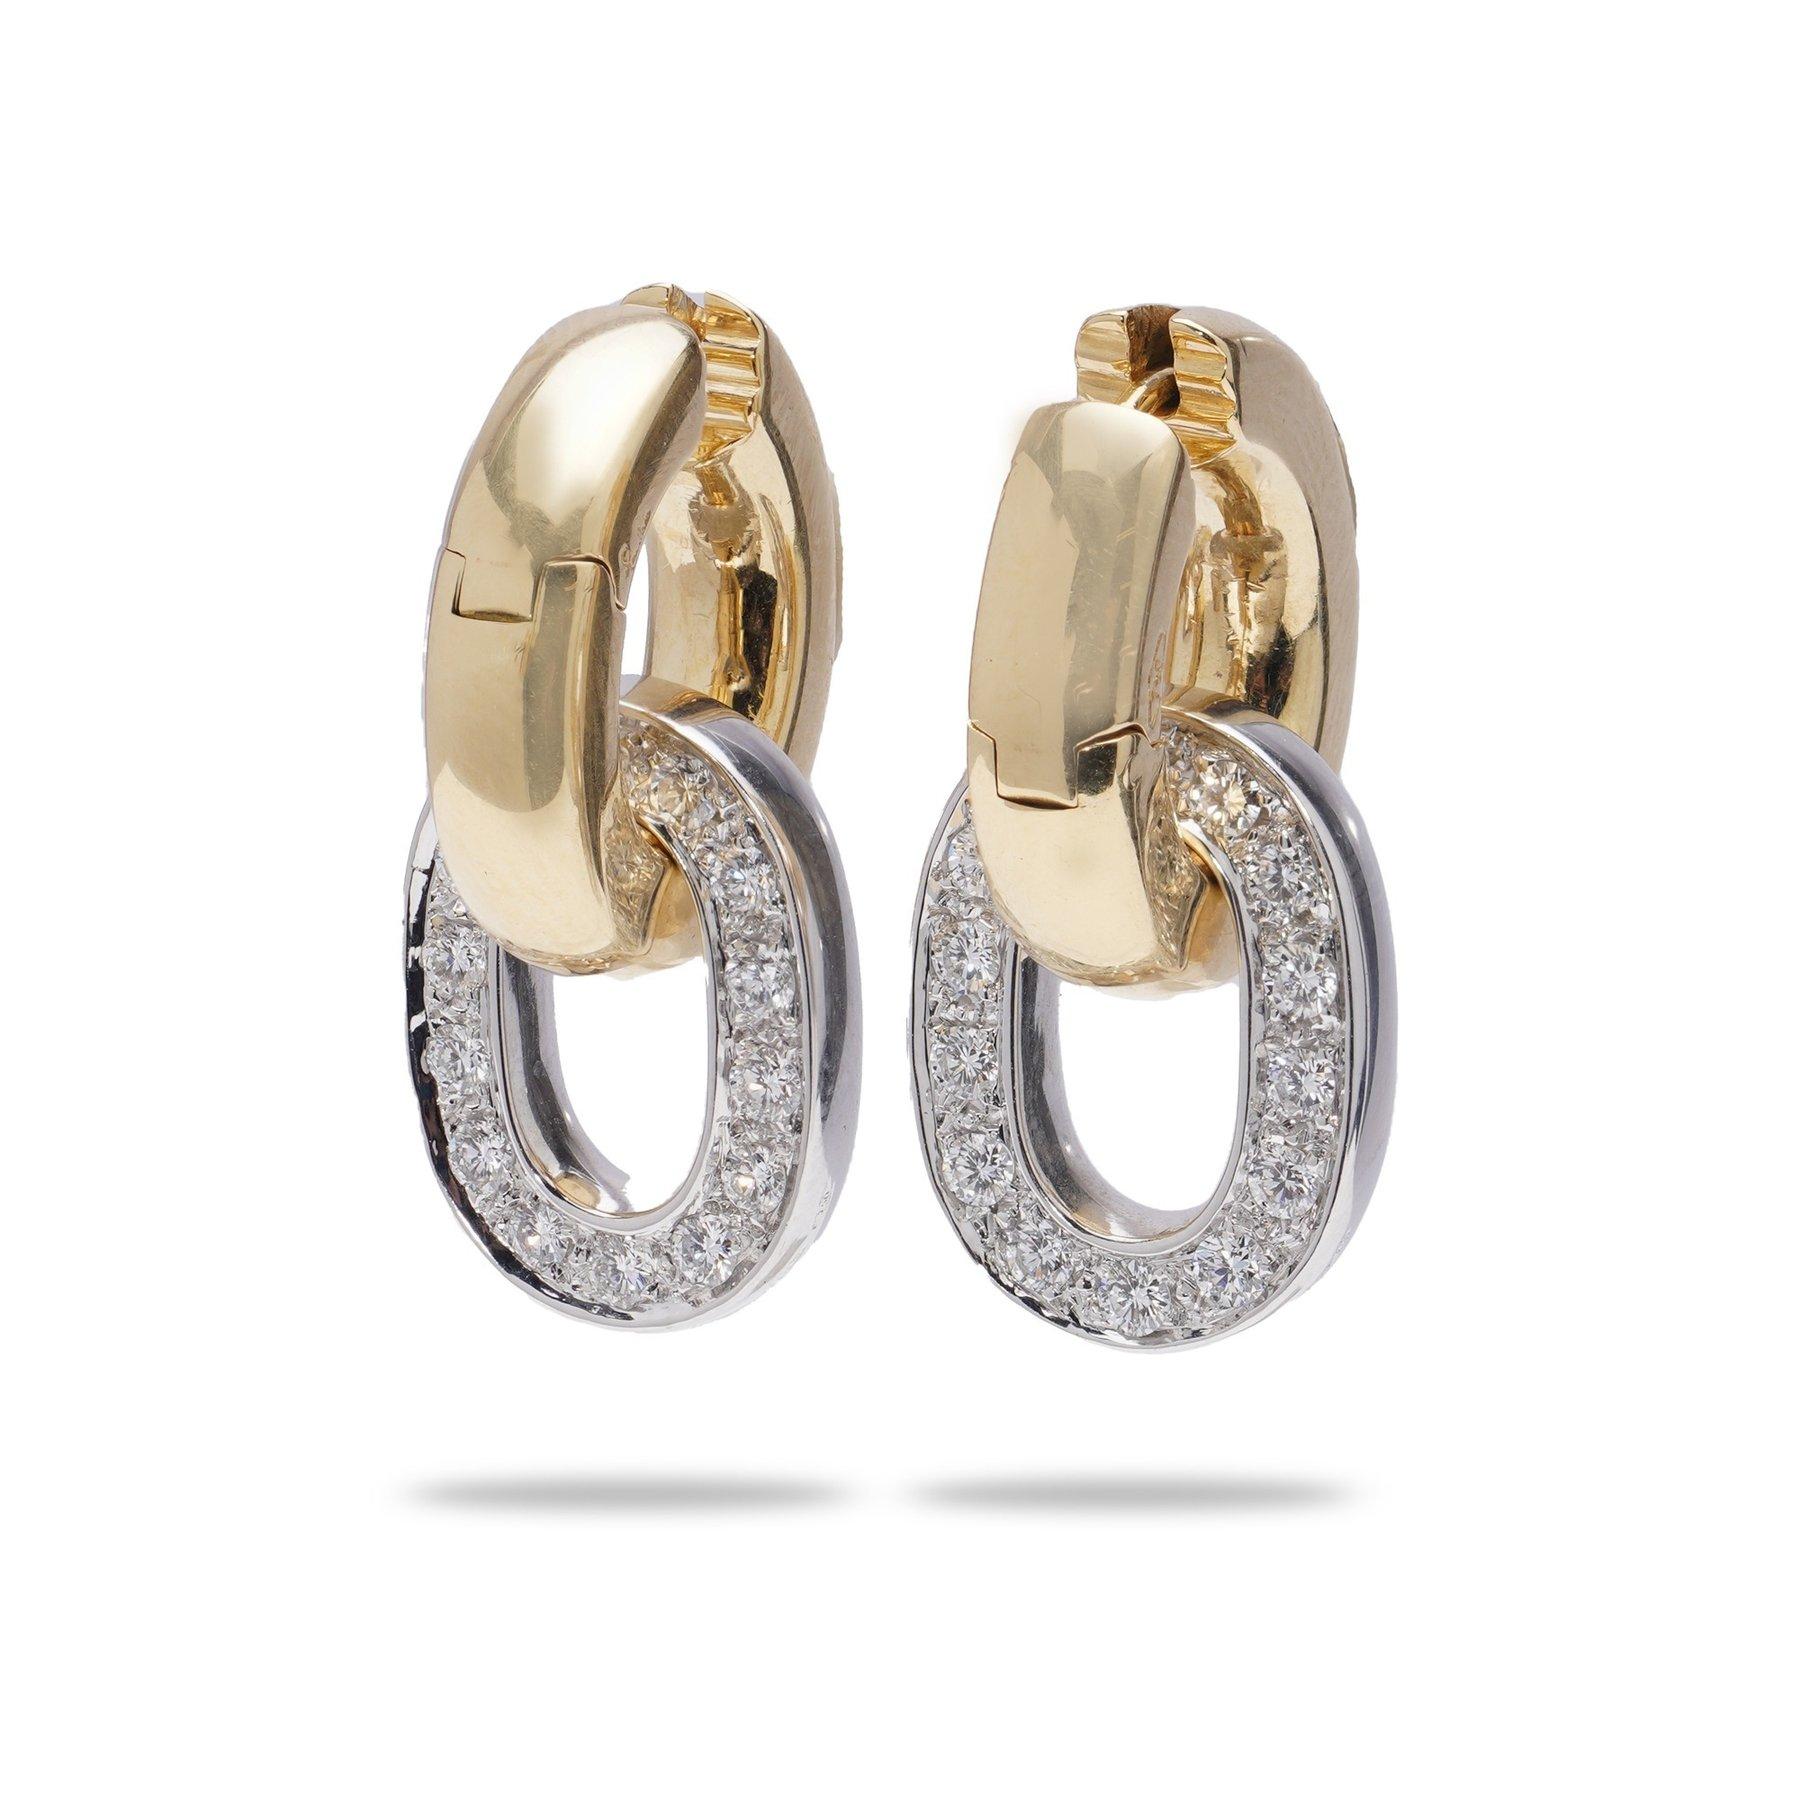 Pomellato 18kt yellow and white gold hoop earrings with 1.50 cts. diamonds. 

Dimensions - 
1st hoop size: 1.7 x 0.3 cm 
2nd hoop size: 1.6 x 0.2 cm 
Approx. Strap length: 71 cm 
Weight: 18.44 grams

Diamonds -
Cut: Round brilliant
Quantity of